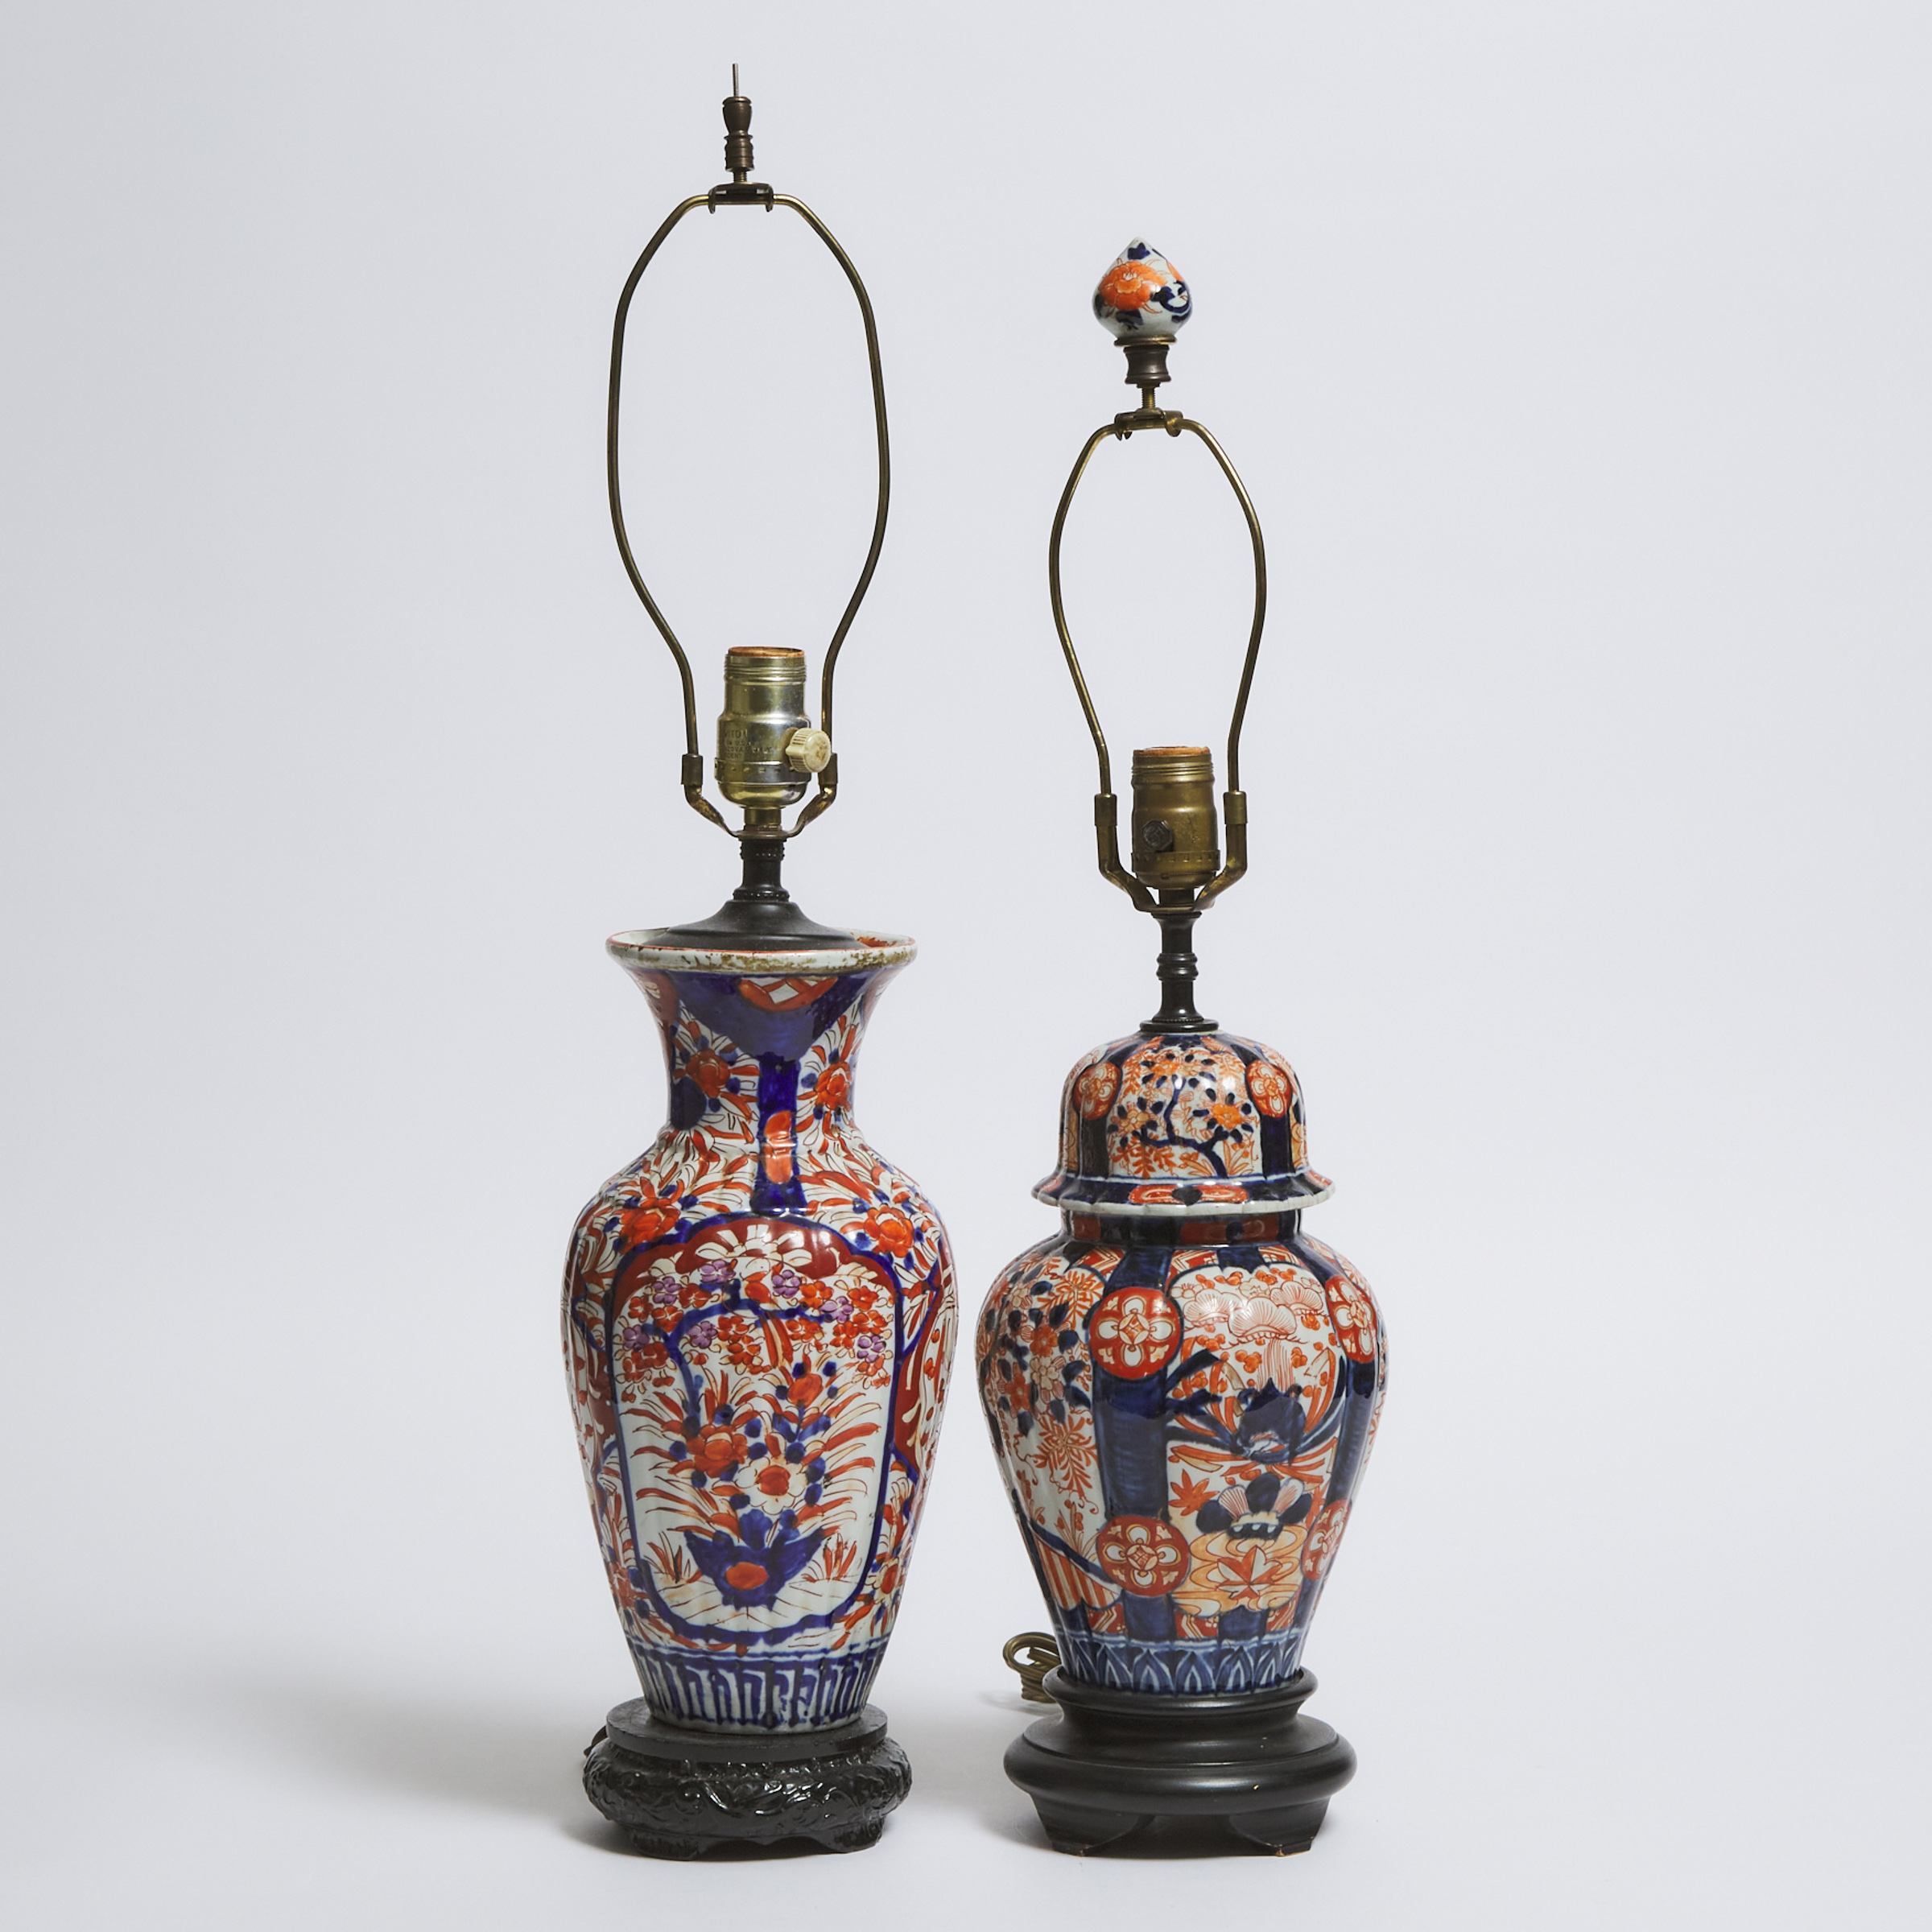 Two Japanese Imari Ware Vase Lamps, early 20th century